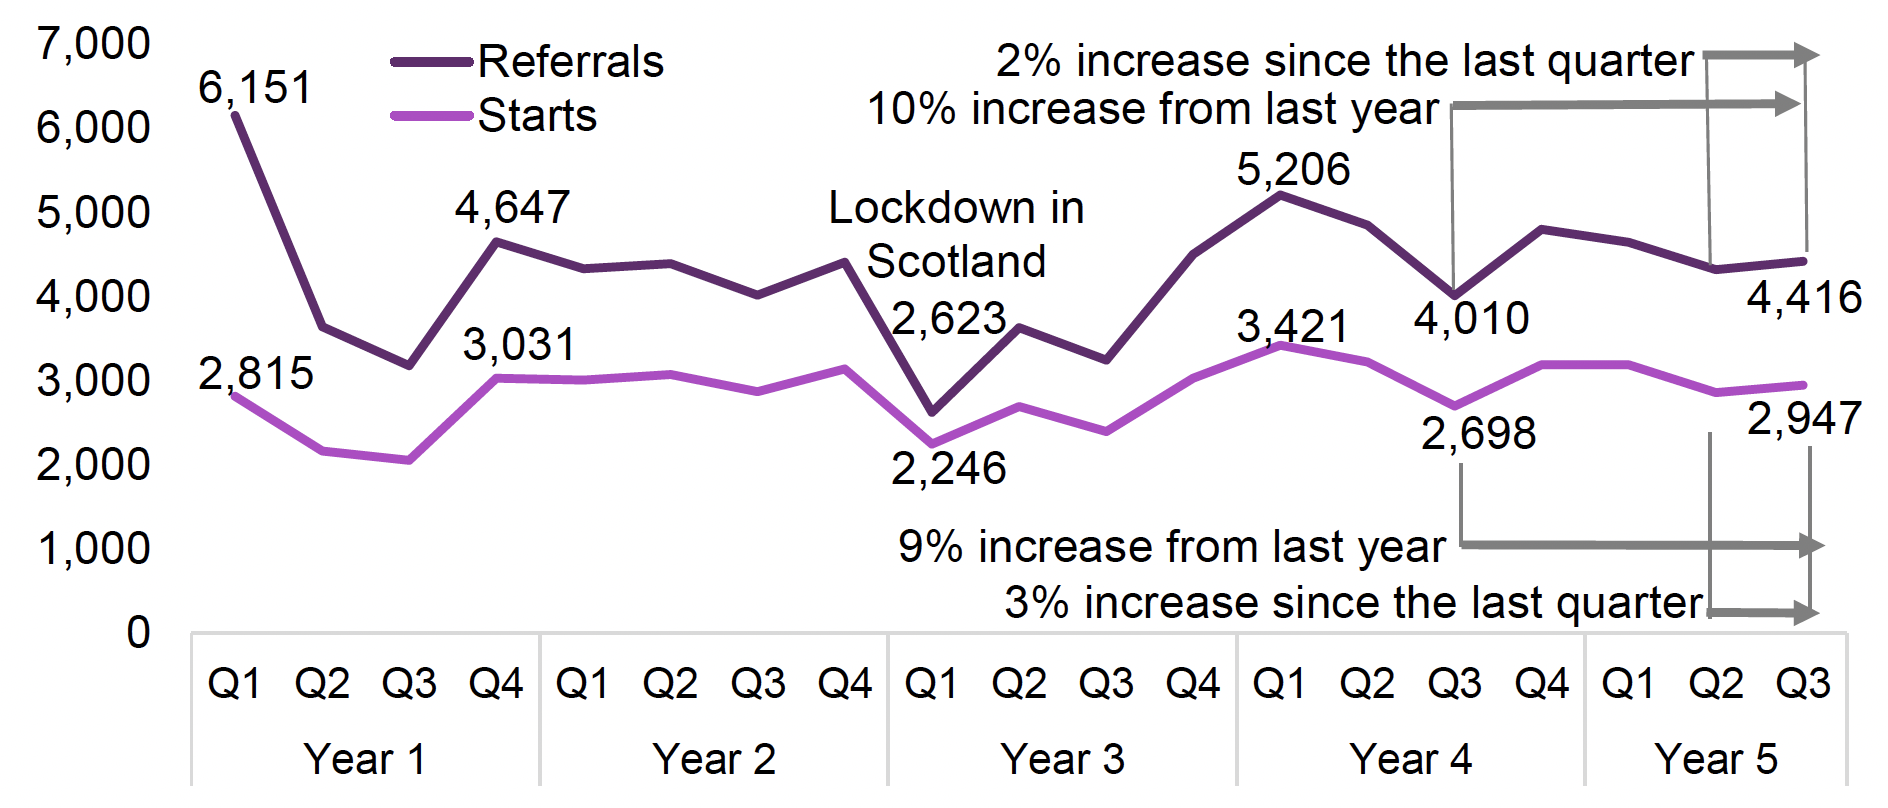 Referrals to FSS increased 2% from last quarter and for starts there was a 3% increase 